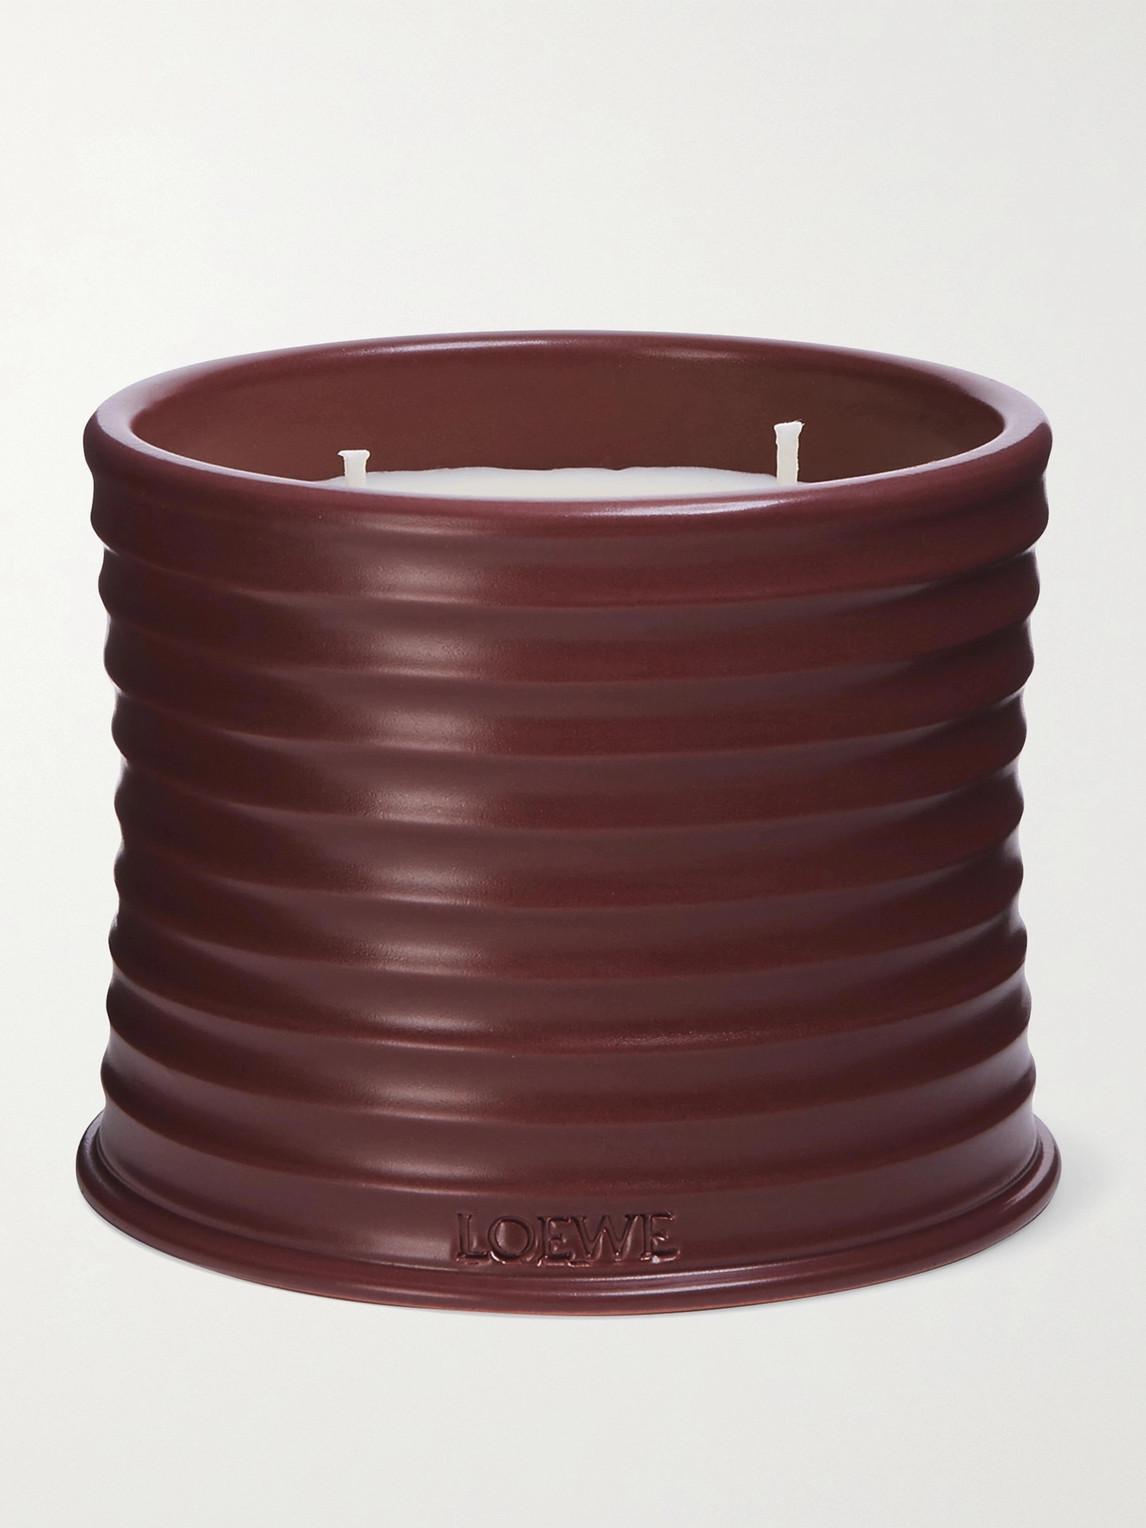 Loewe Home Scents Beetroot Scented Candle, 610g In Colorless